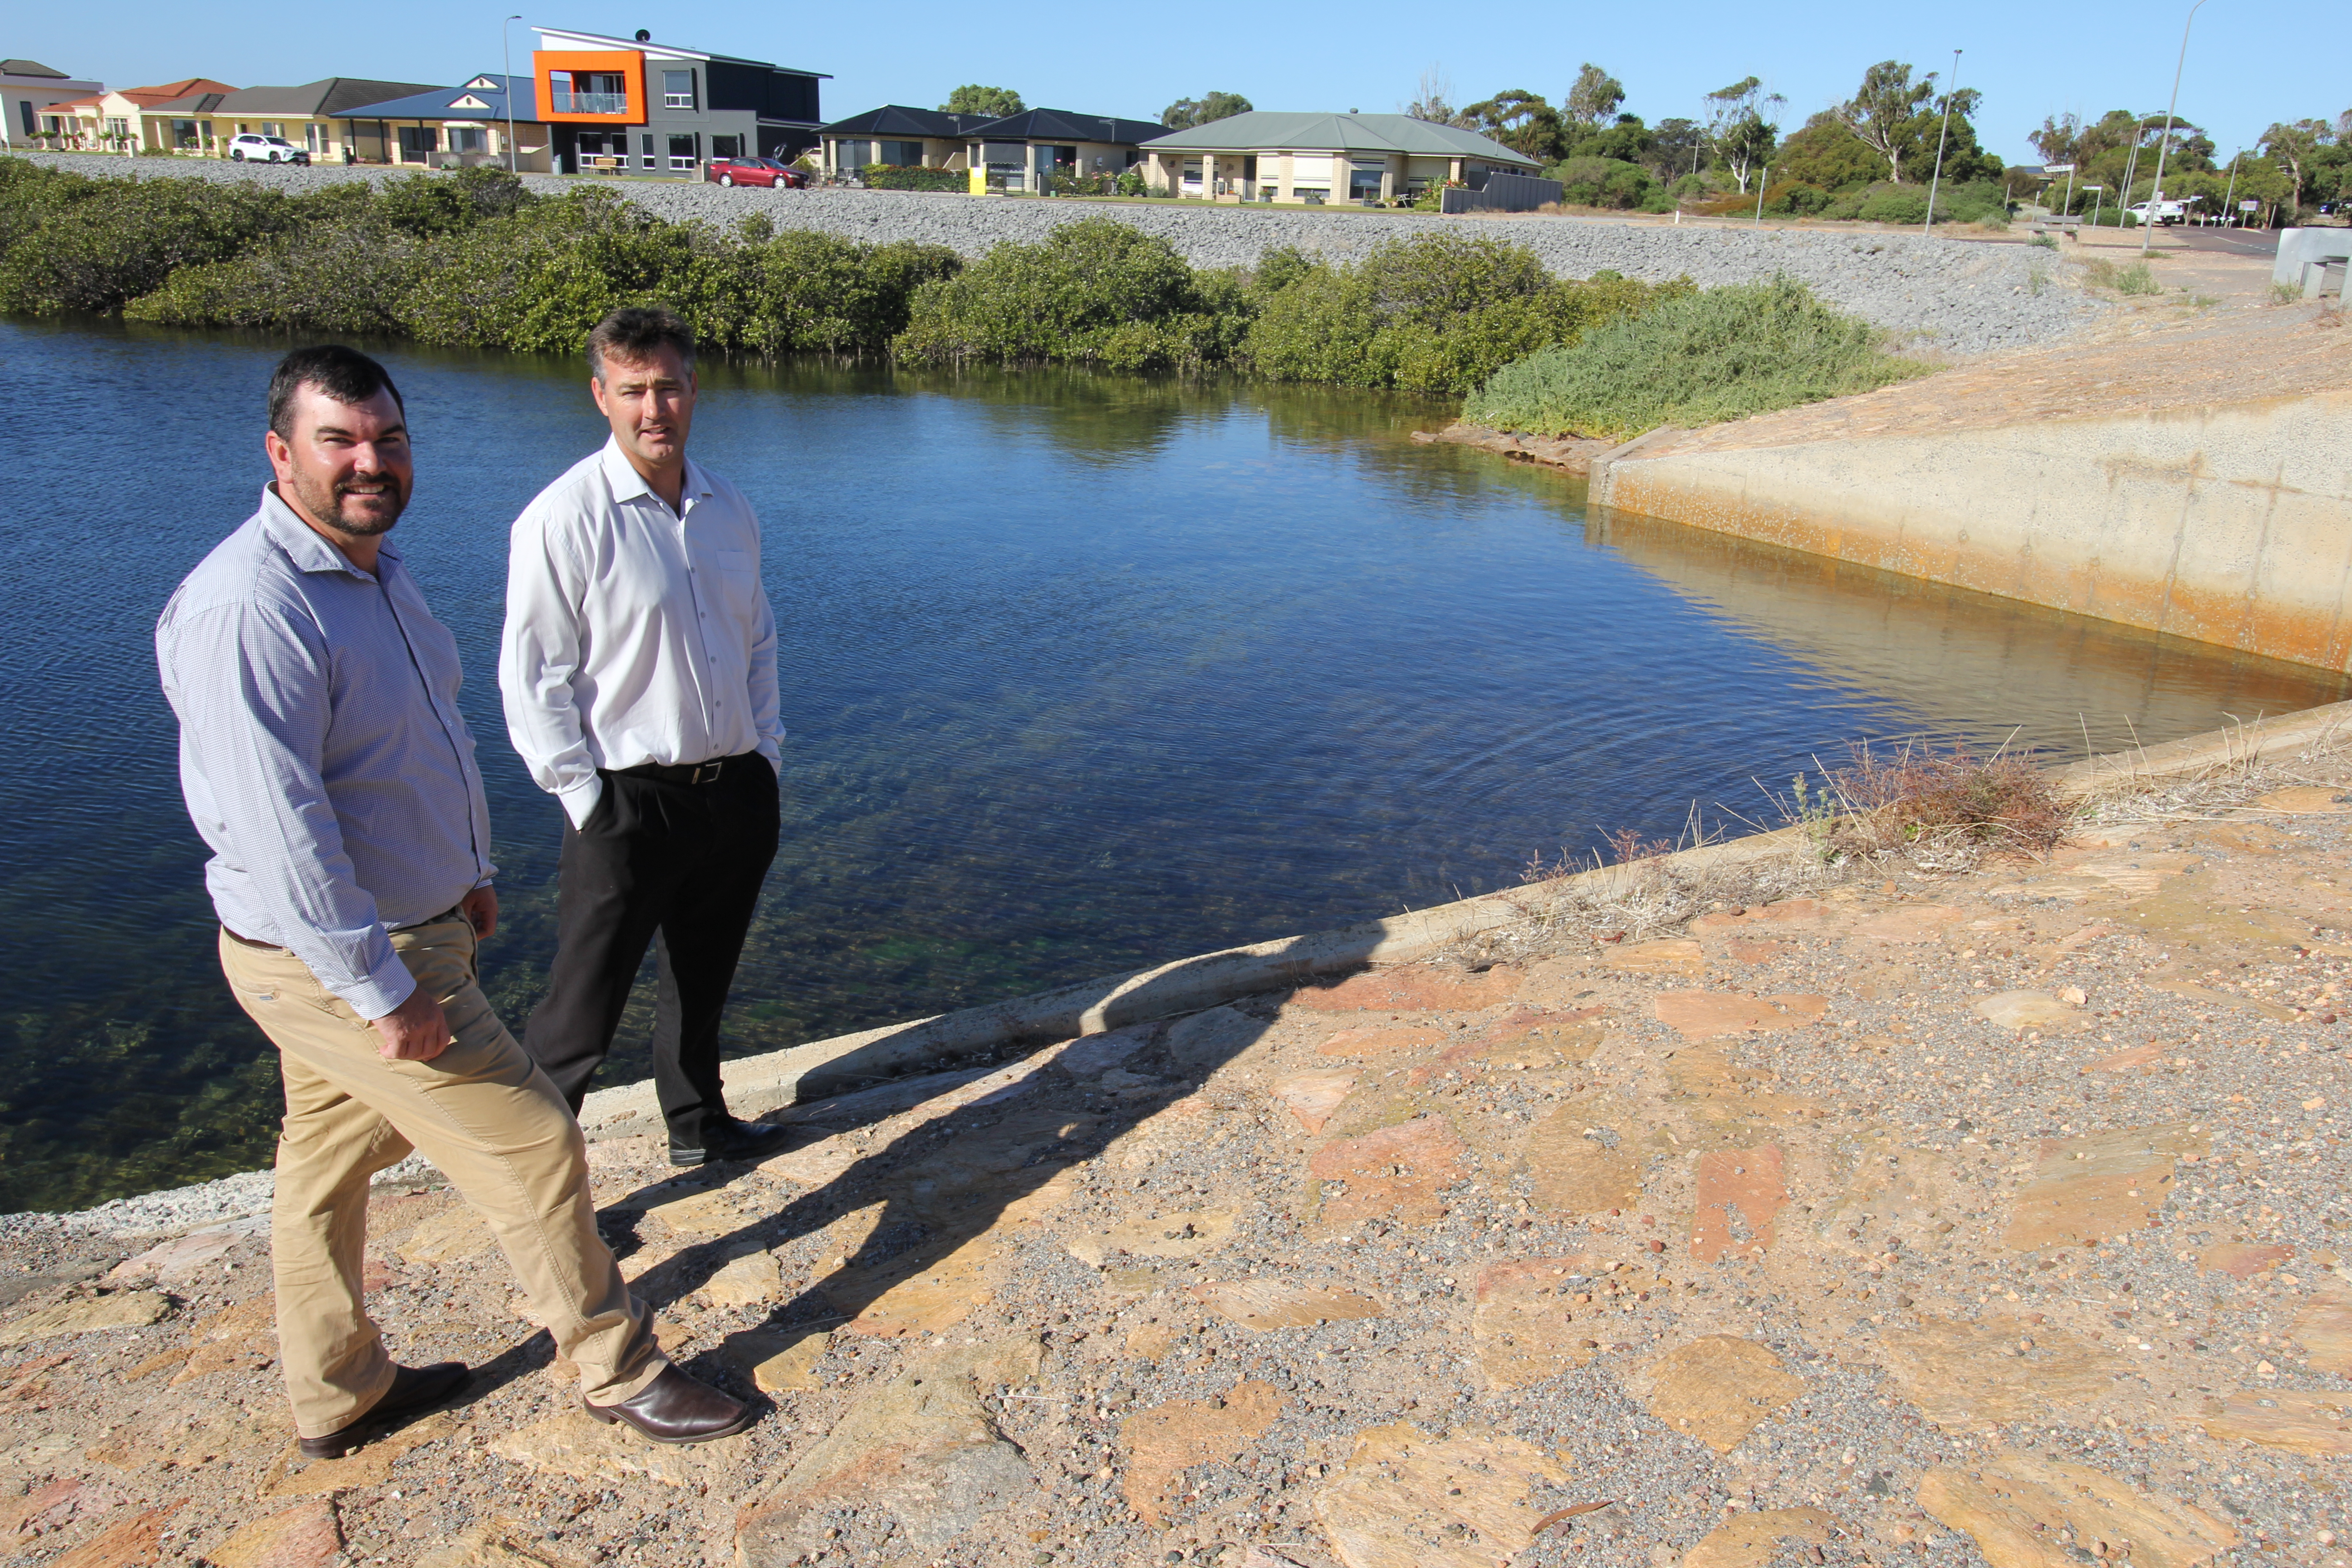 Mayor Sam Telfer and Works and Infrastructure Manager Damian Windsor at the causeway.